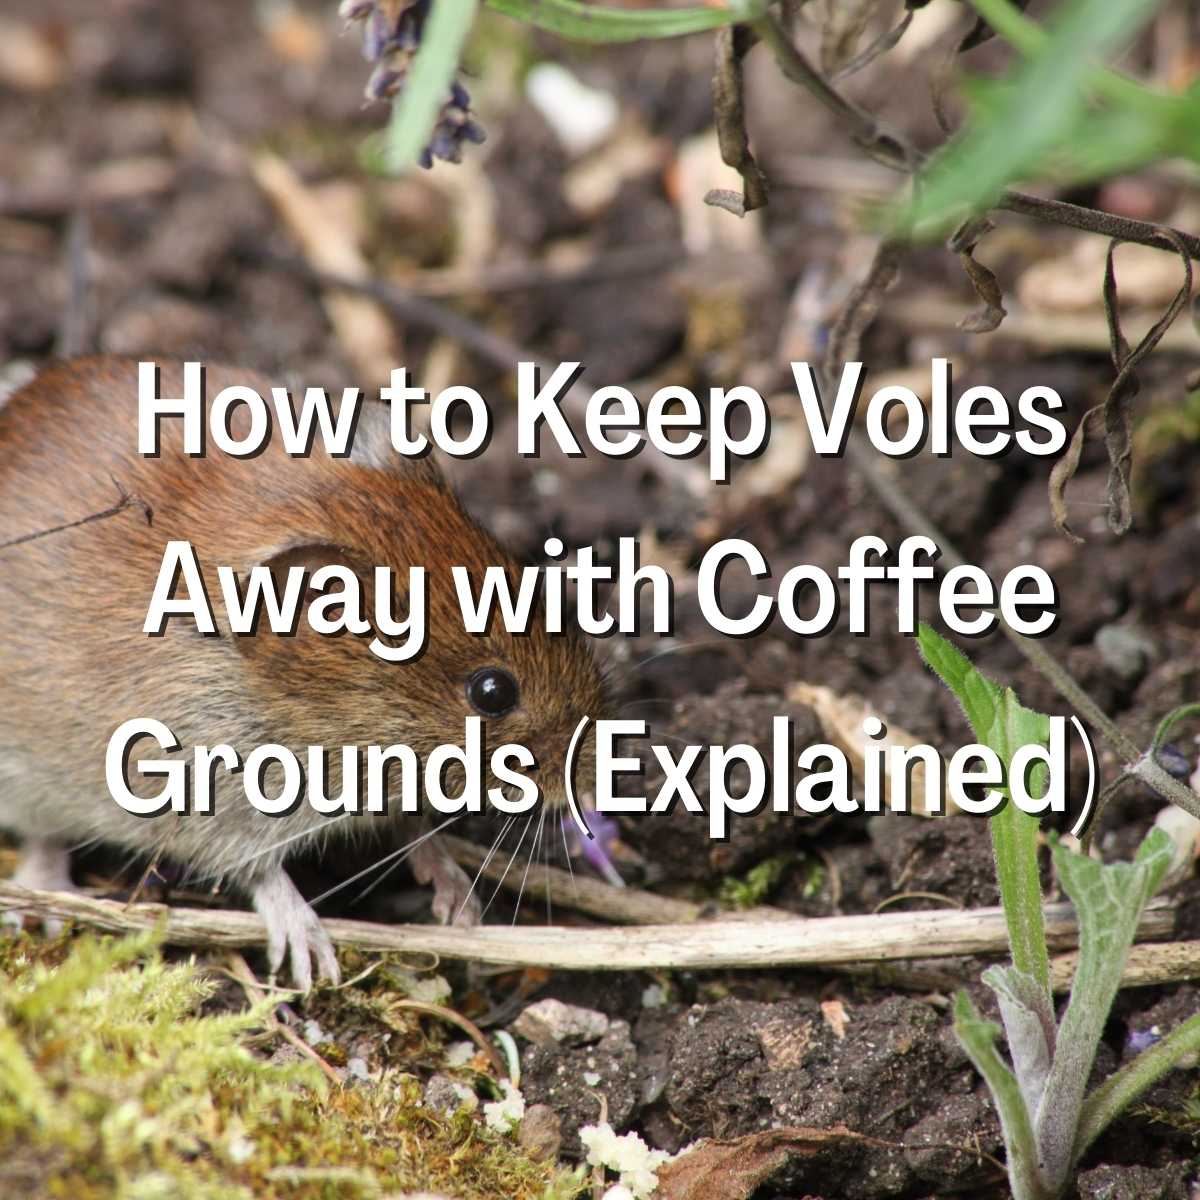 How to Keep Voles Away with Coffee Grounds